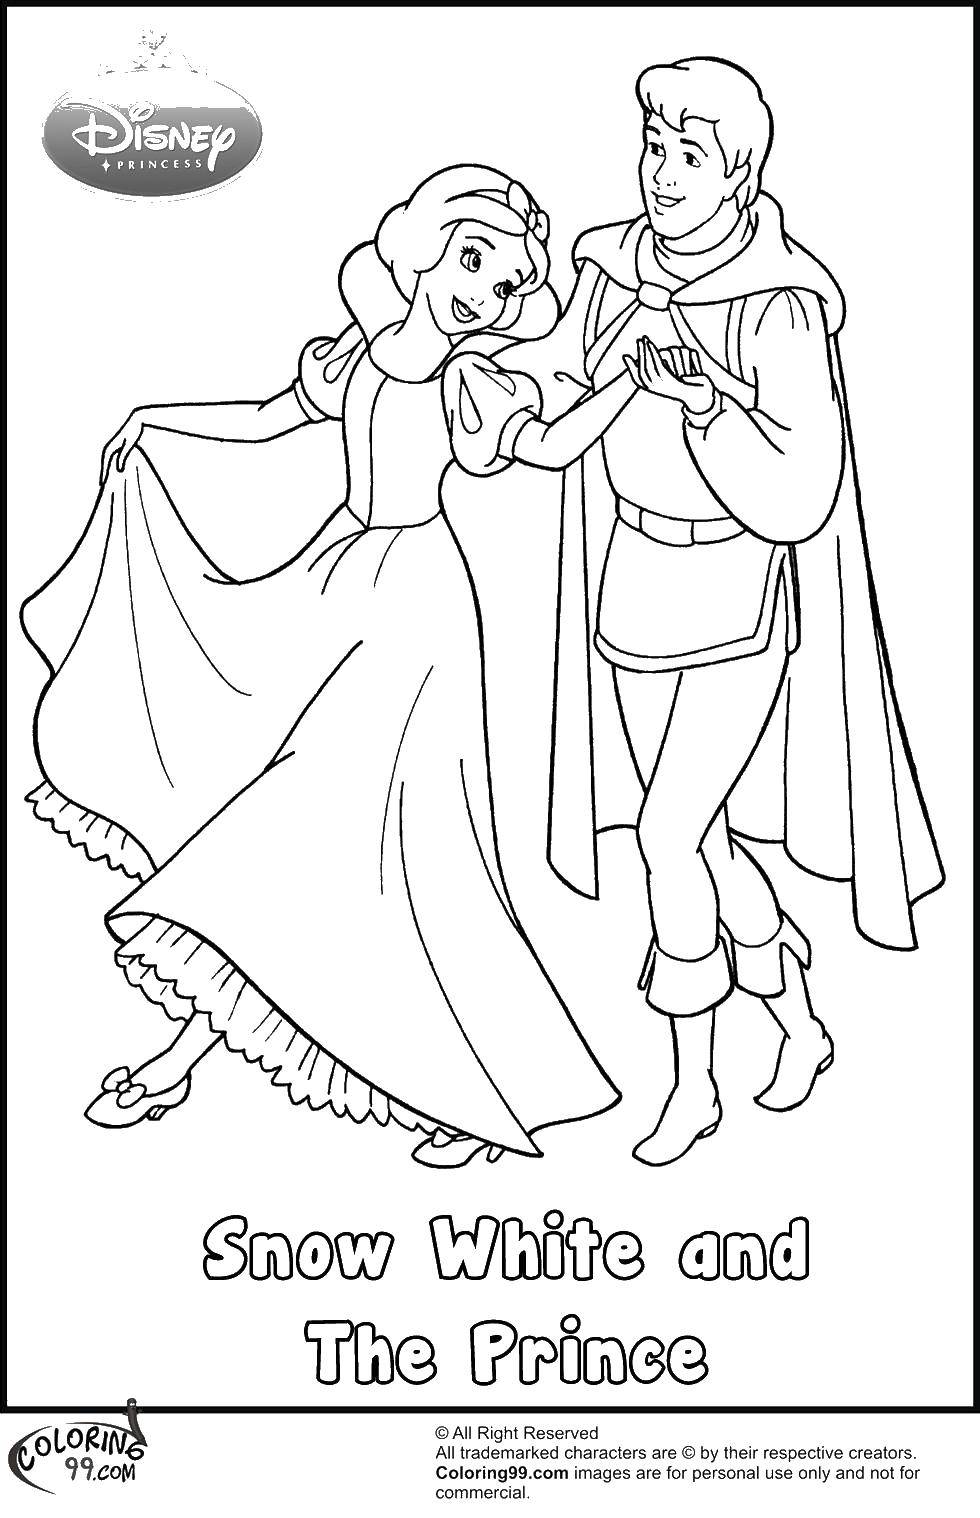 Coloring Snow white and the Prince. Category snow white. Tags:  Snow white, the Prince, fairy tales, cartoons.